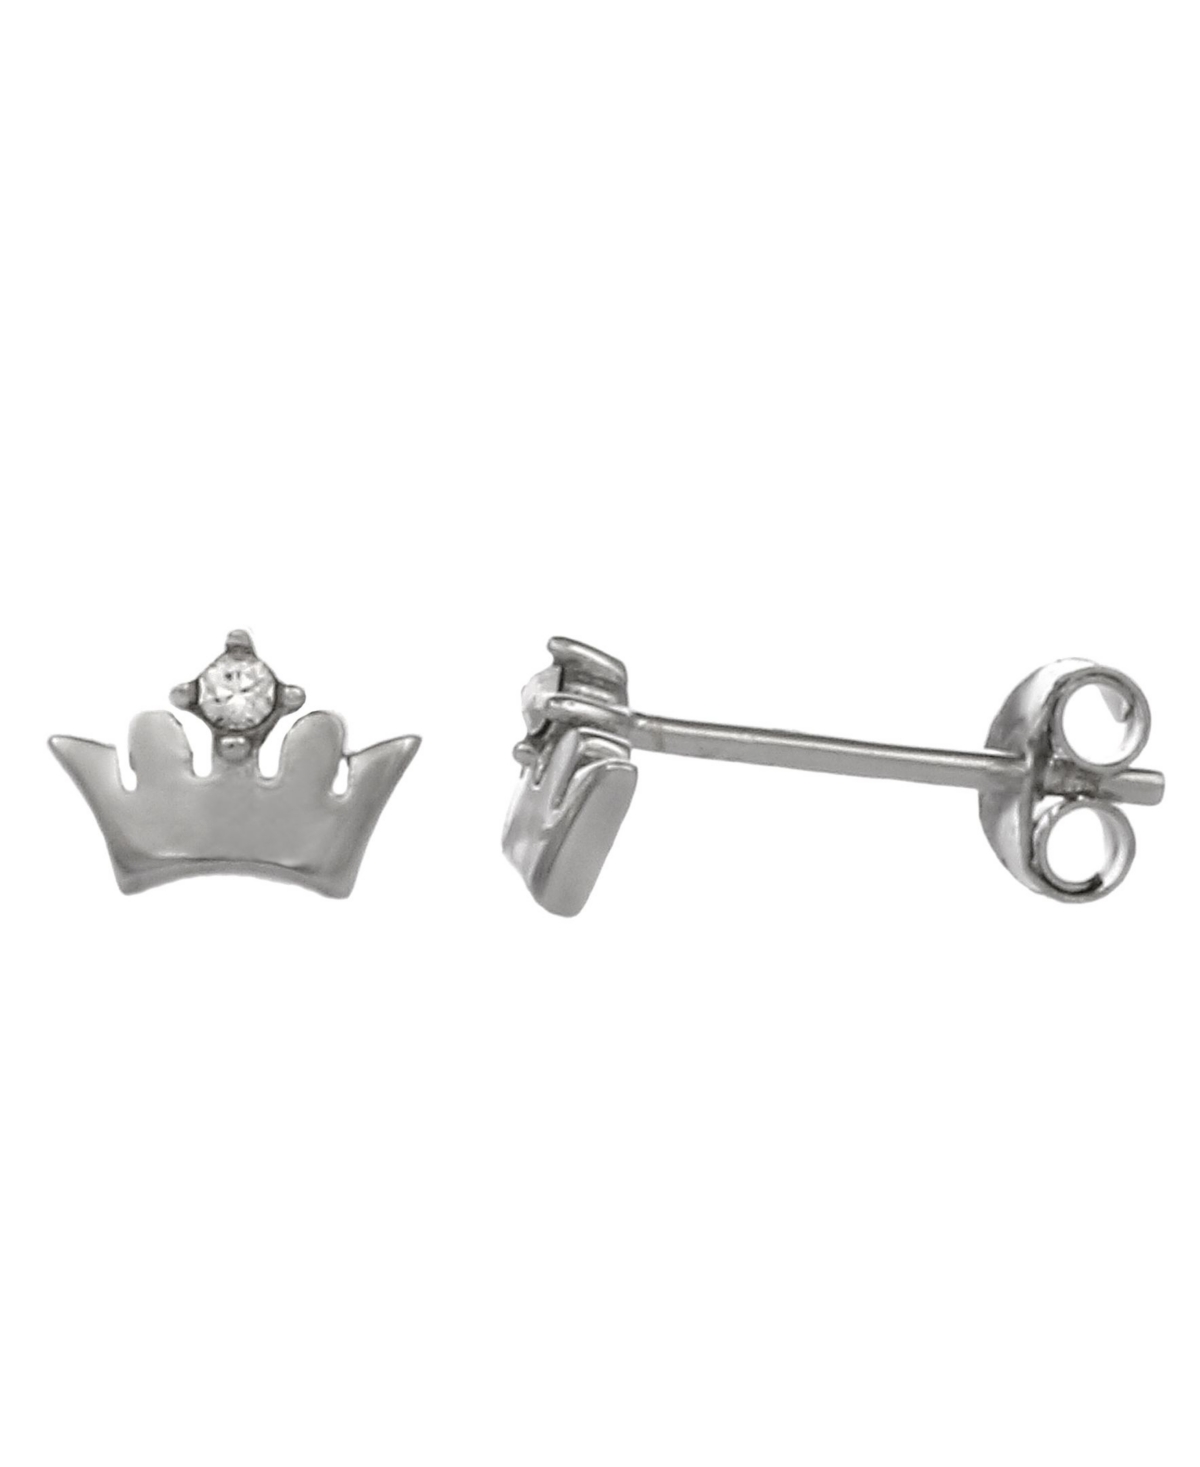 Fao Schwarz Women's Sterling Silver Crown Stud Earrings with Crystal Stone Accent